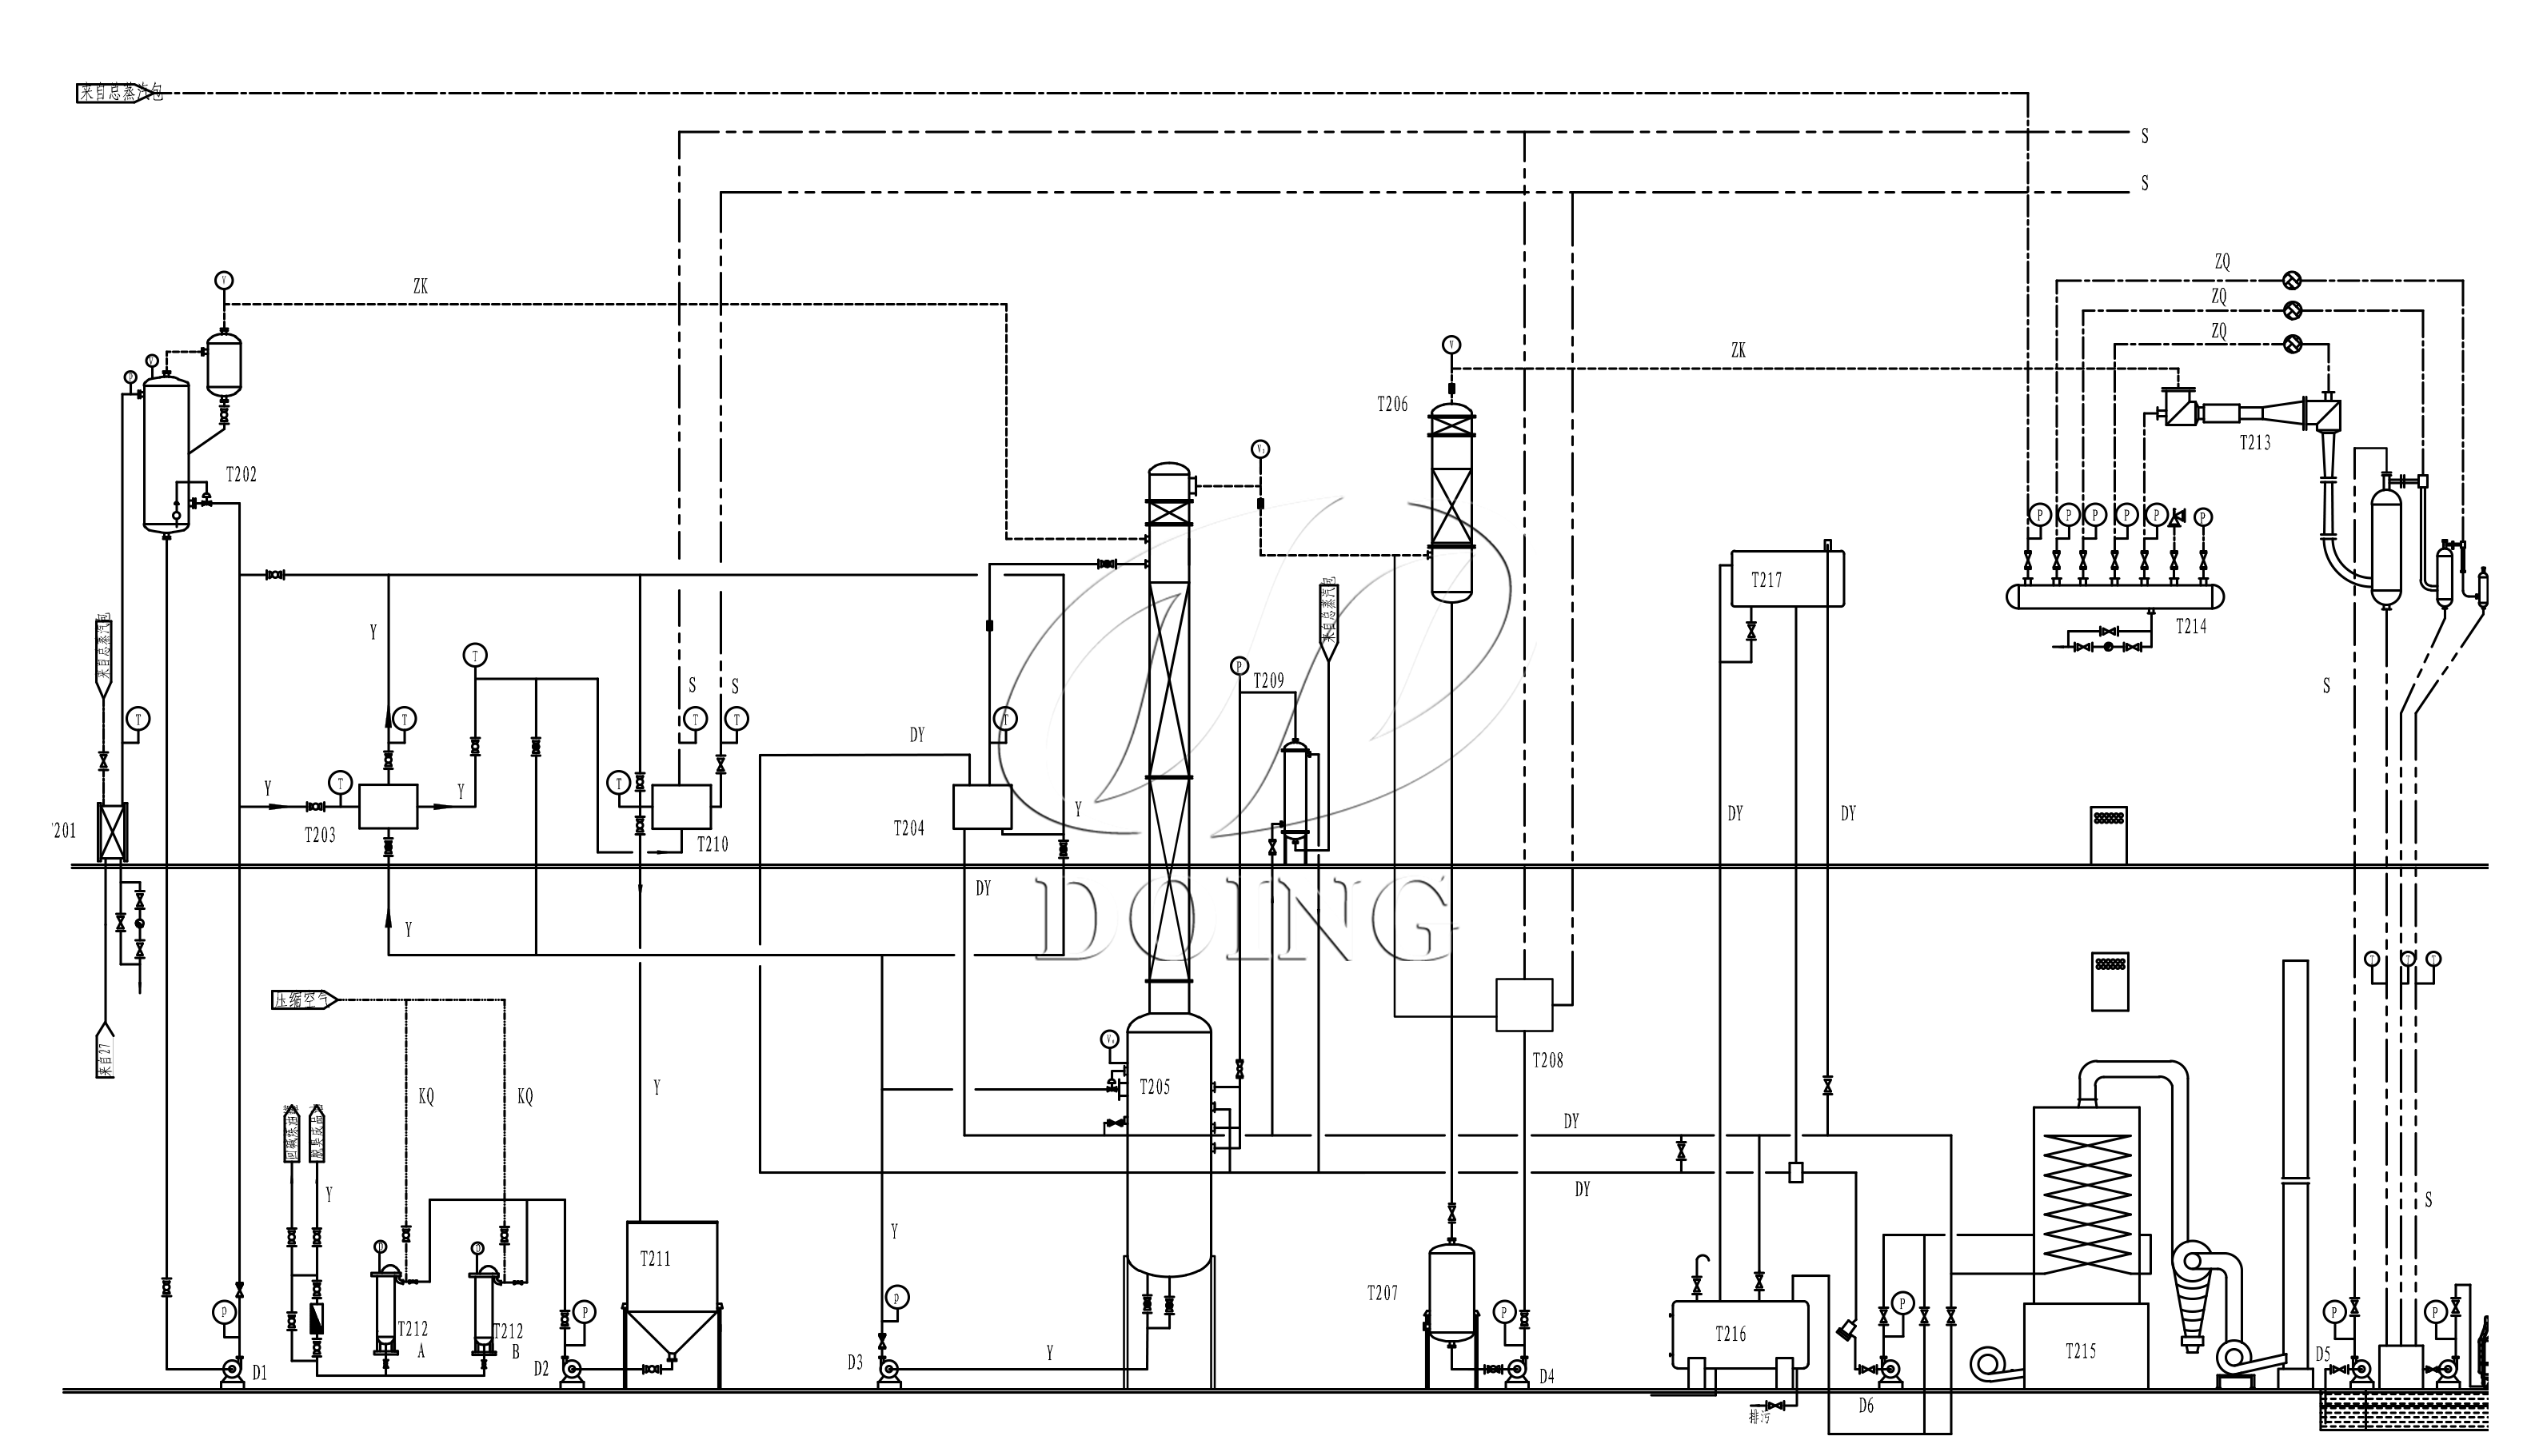 Full-Continuous Oil Refining Process Flow Chart